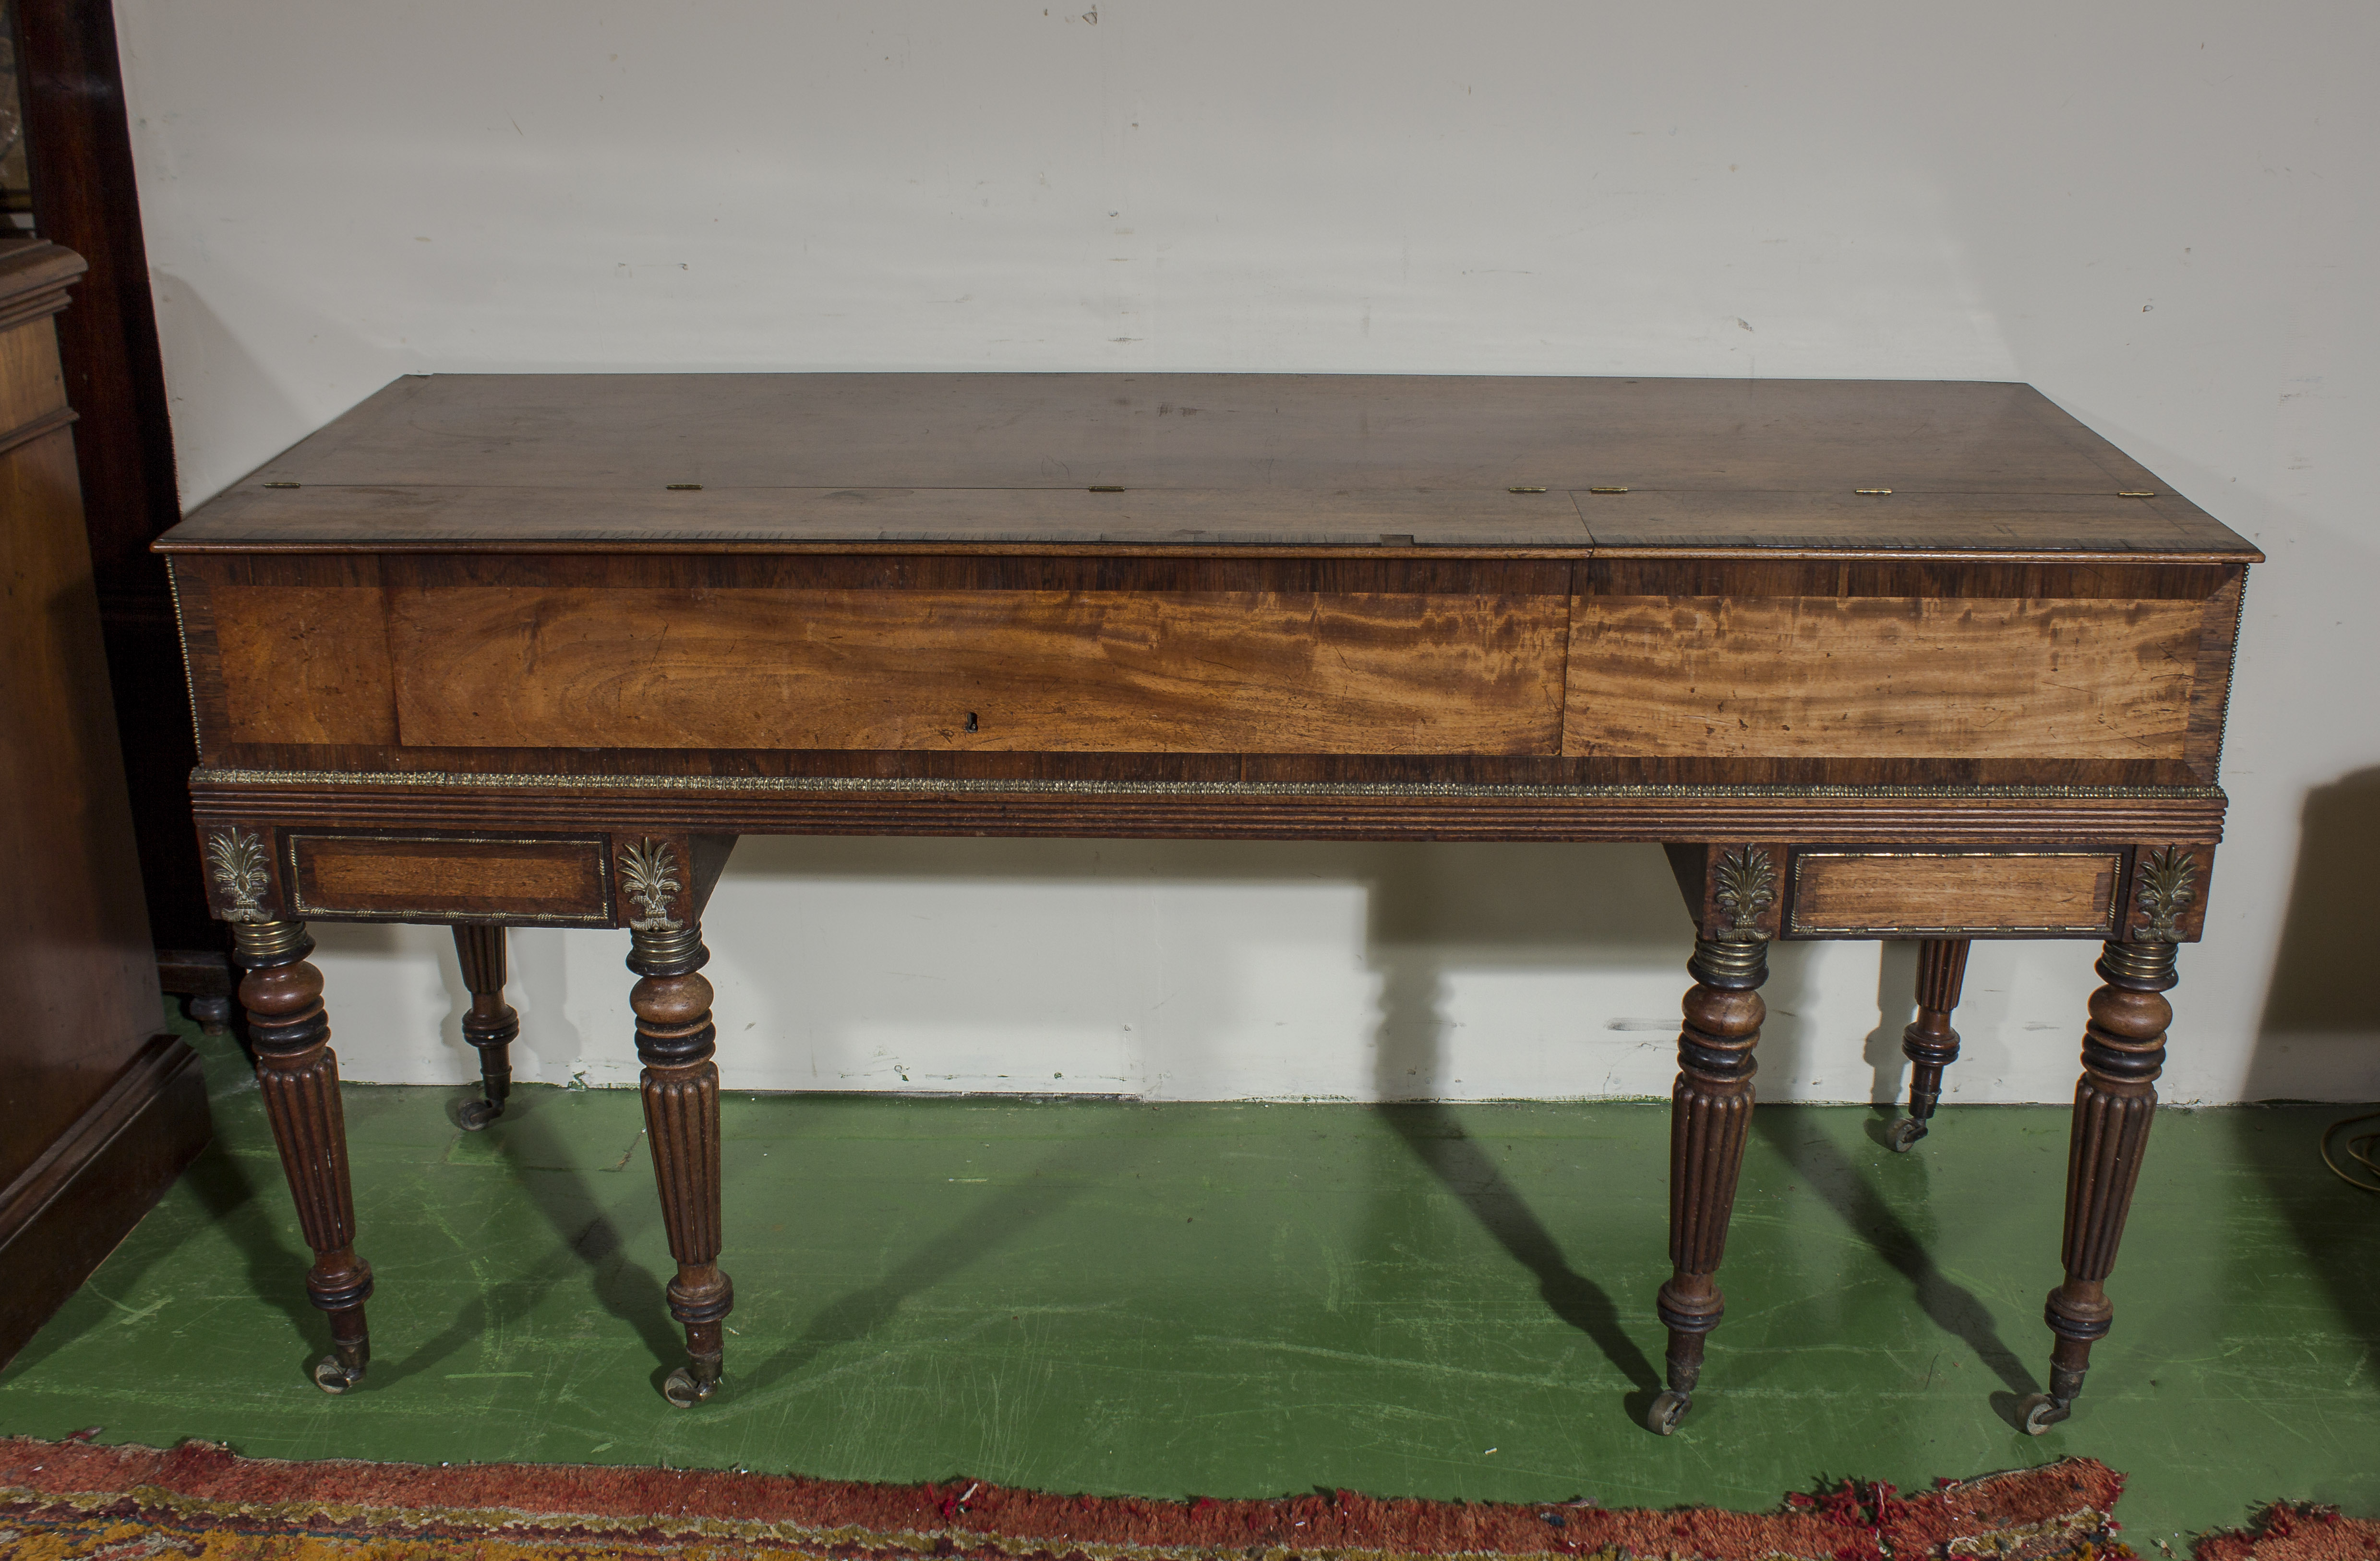 A Regency mahogany spinette case converted to a desk